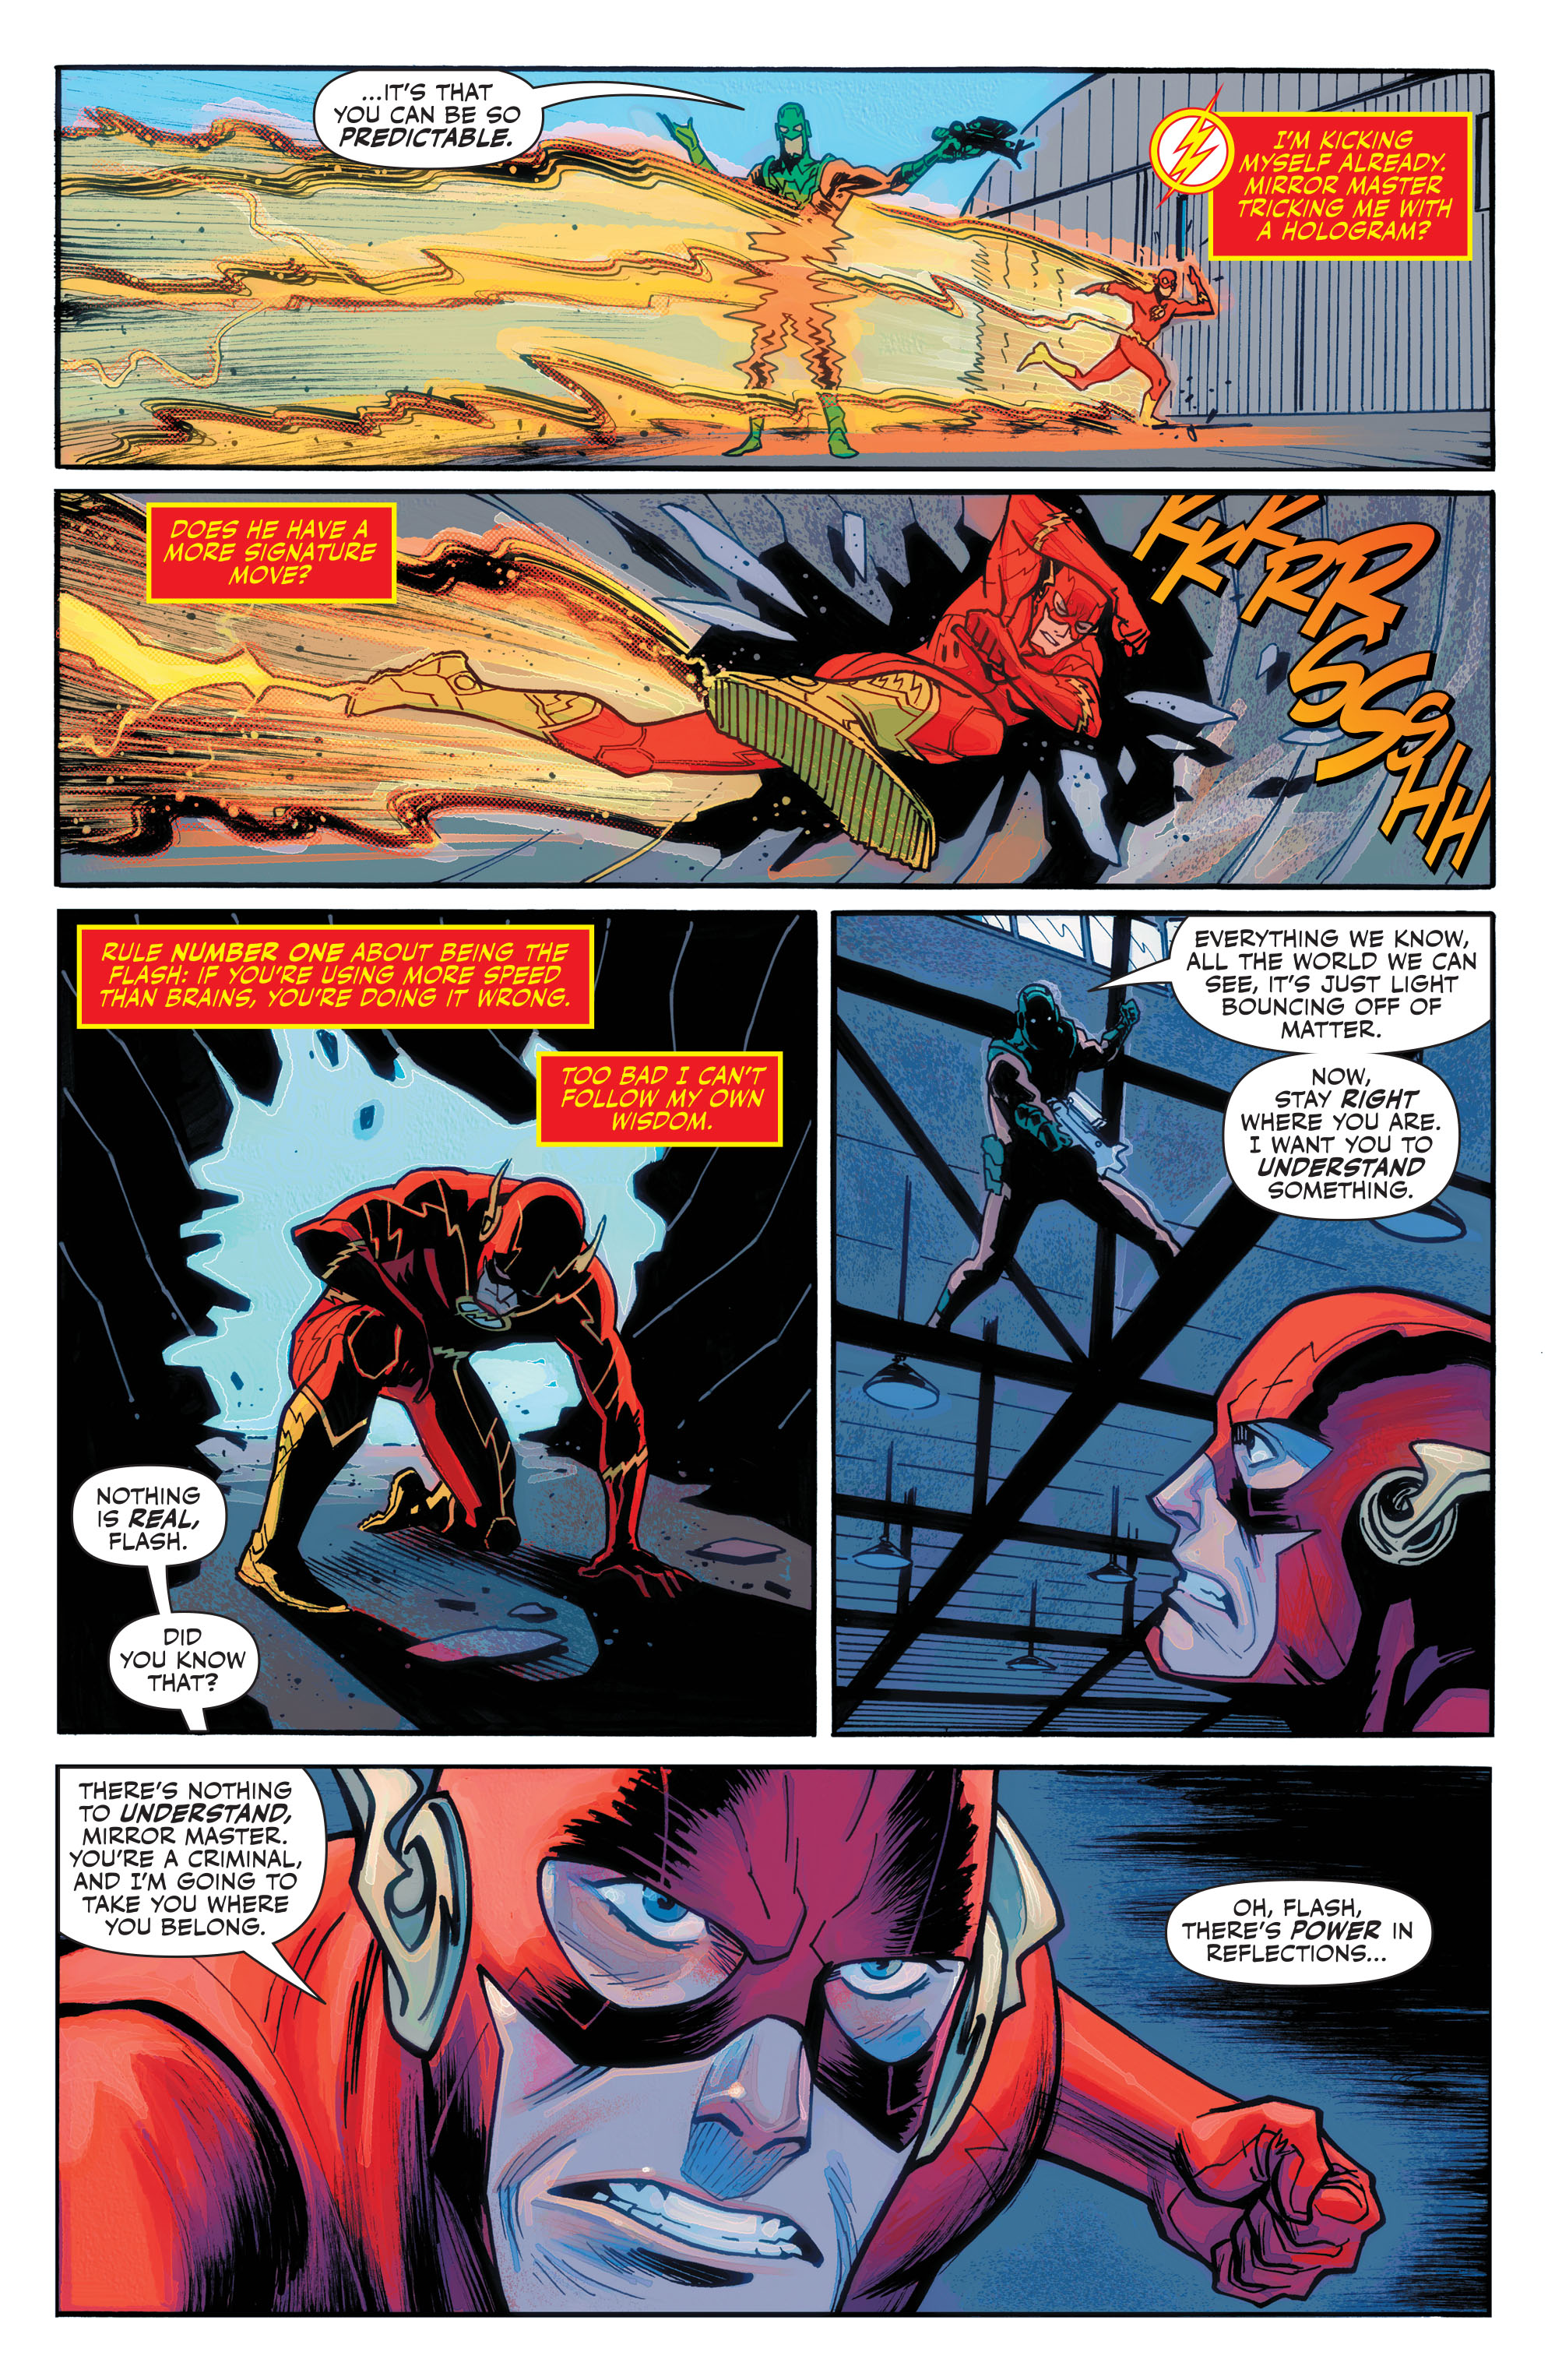 The Flash: Fastest Man Alive (2020-): Chapter 9 - Page 3